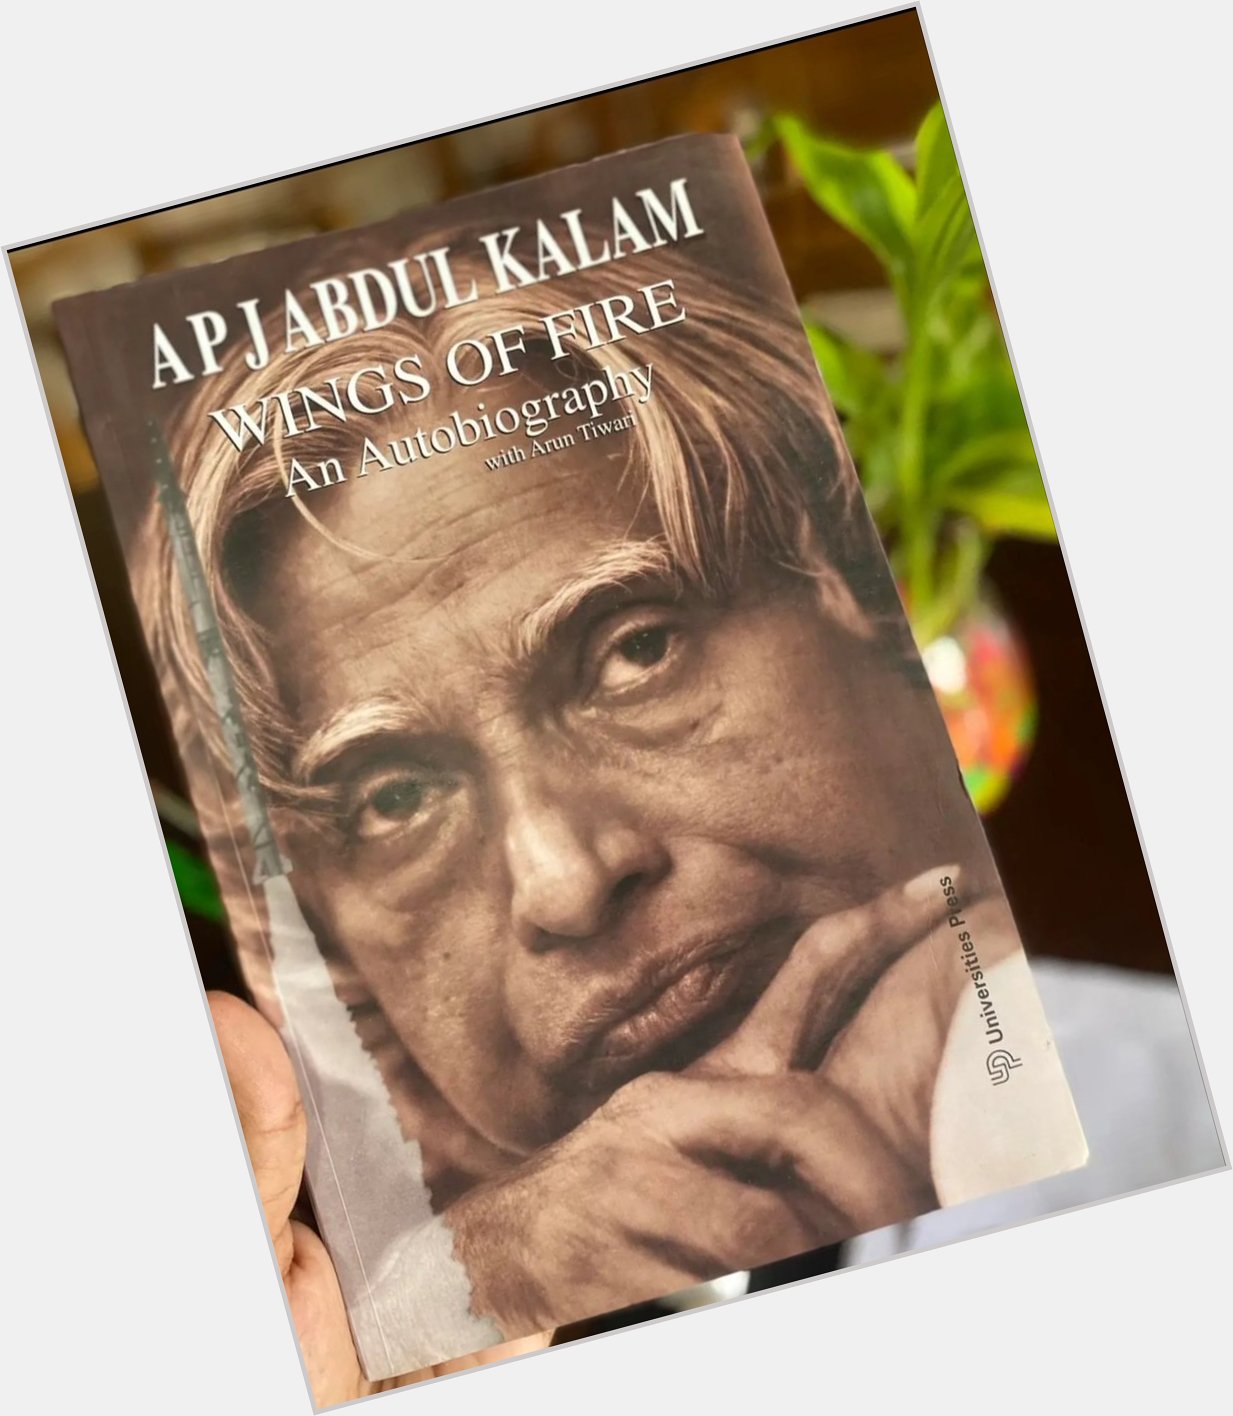 If you want to leave your footprints on the sands of time, donot drag your feet APJ Abdul Kalam.

Happy Birthday  